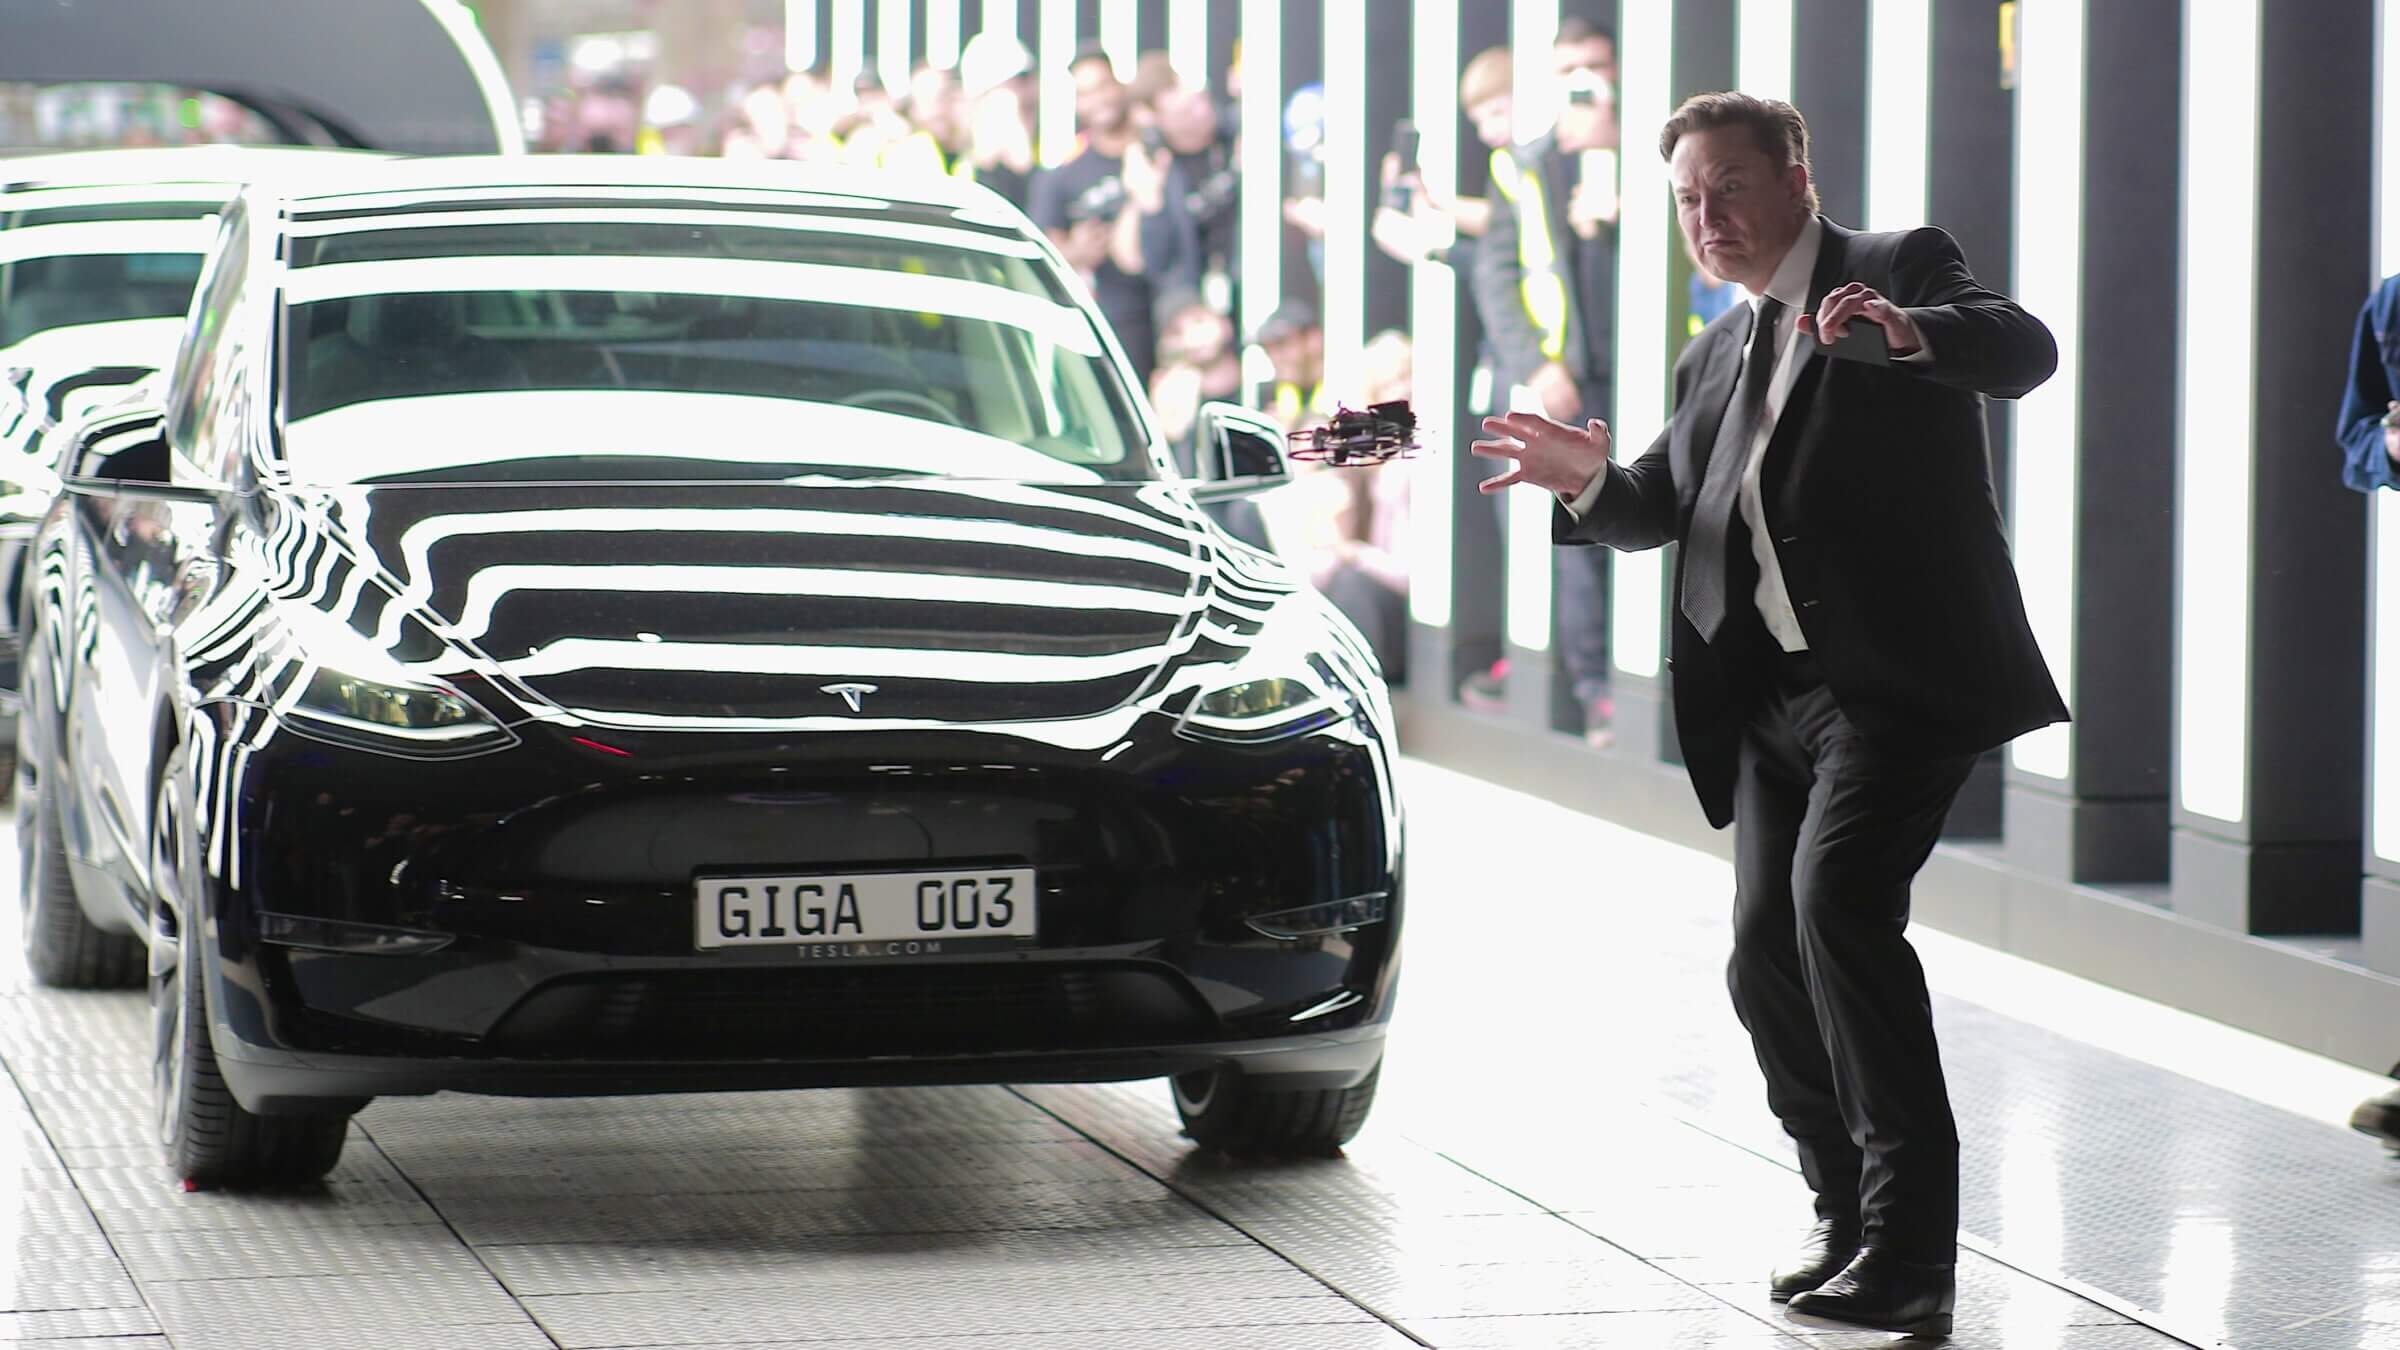  Elon Musk attends the official opening of a Tesla manufacturing plant in Germany.